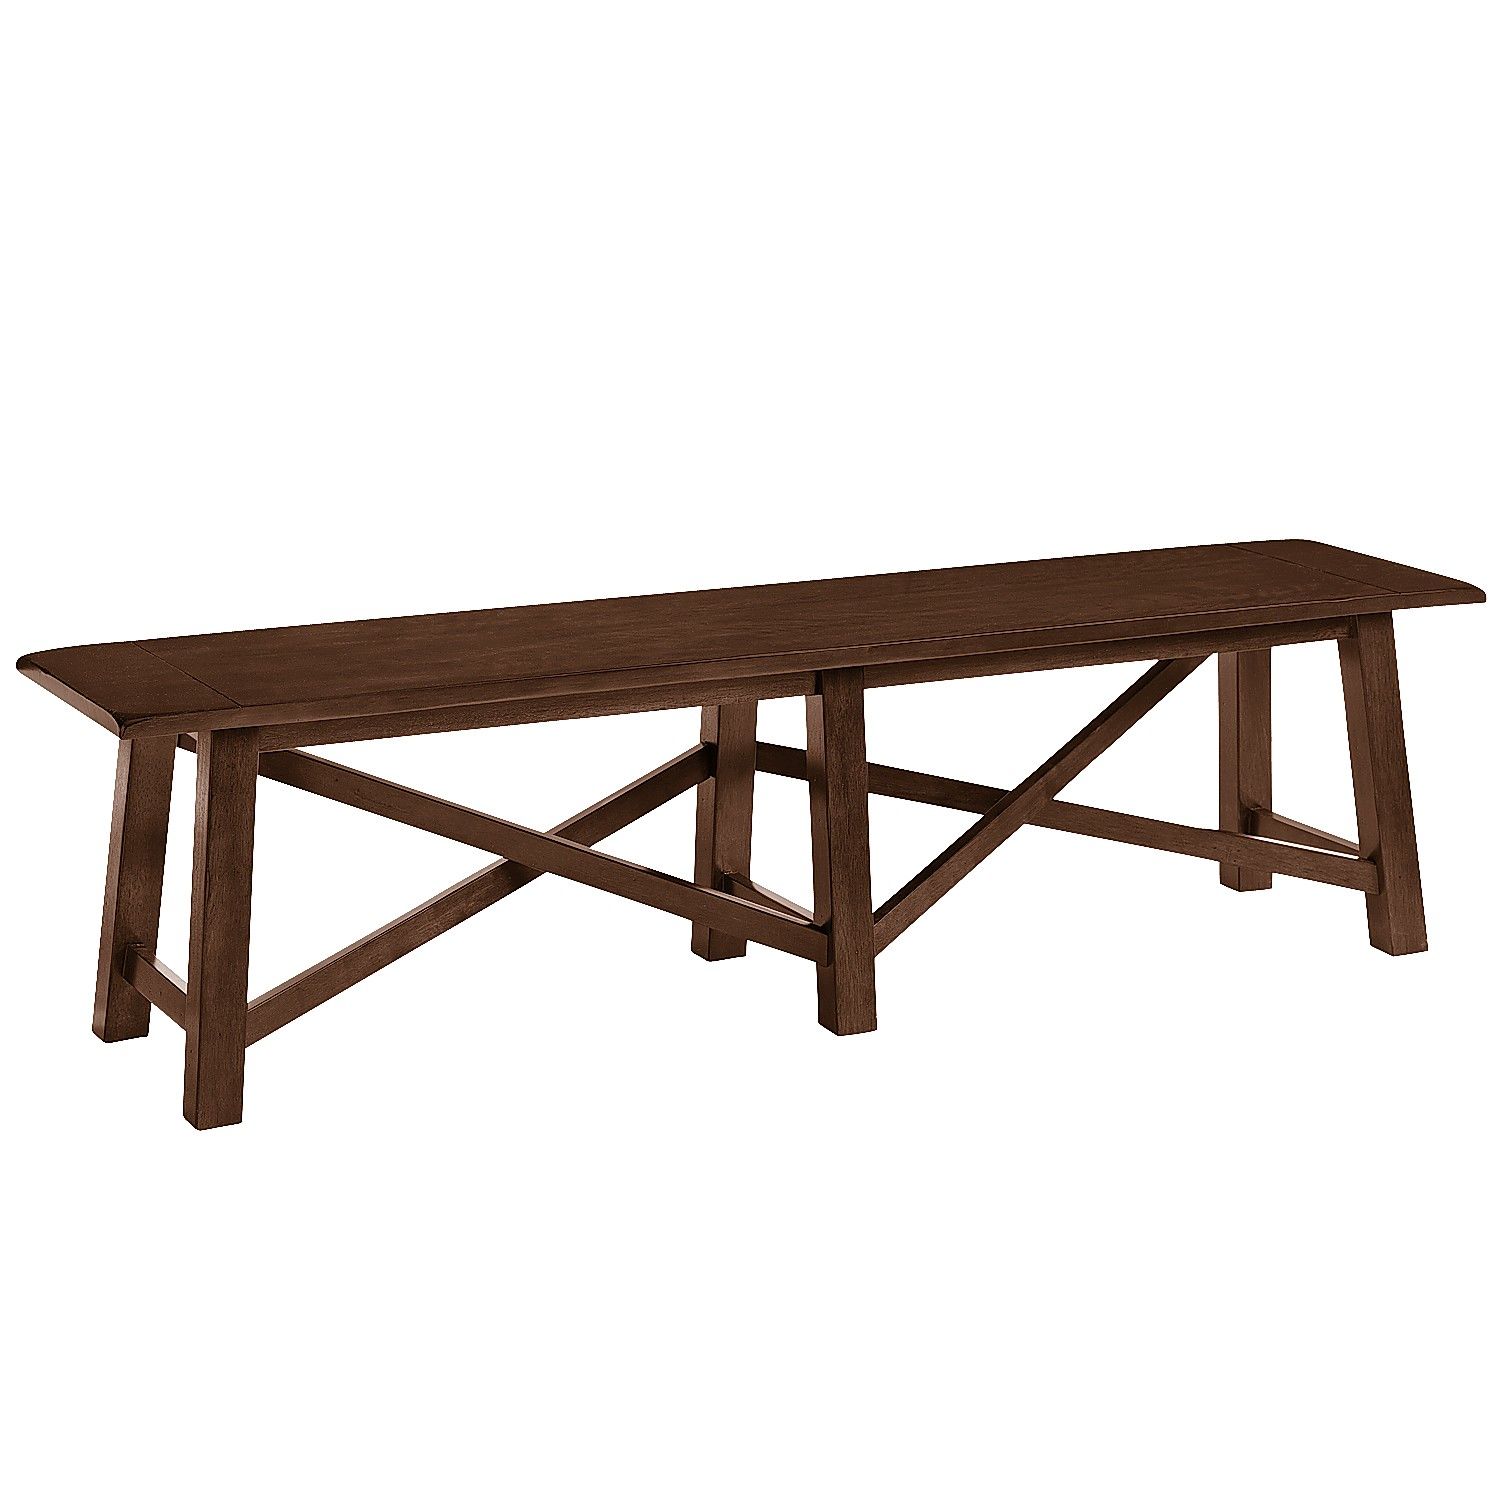 Torrance Mahogany Brown Dining Bench | Pier 1 Imports